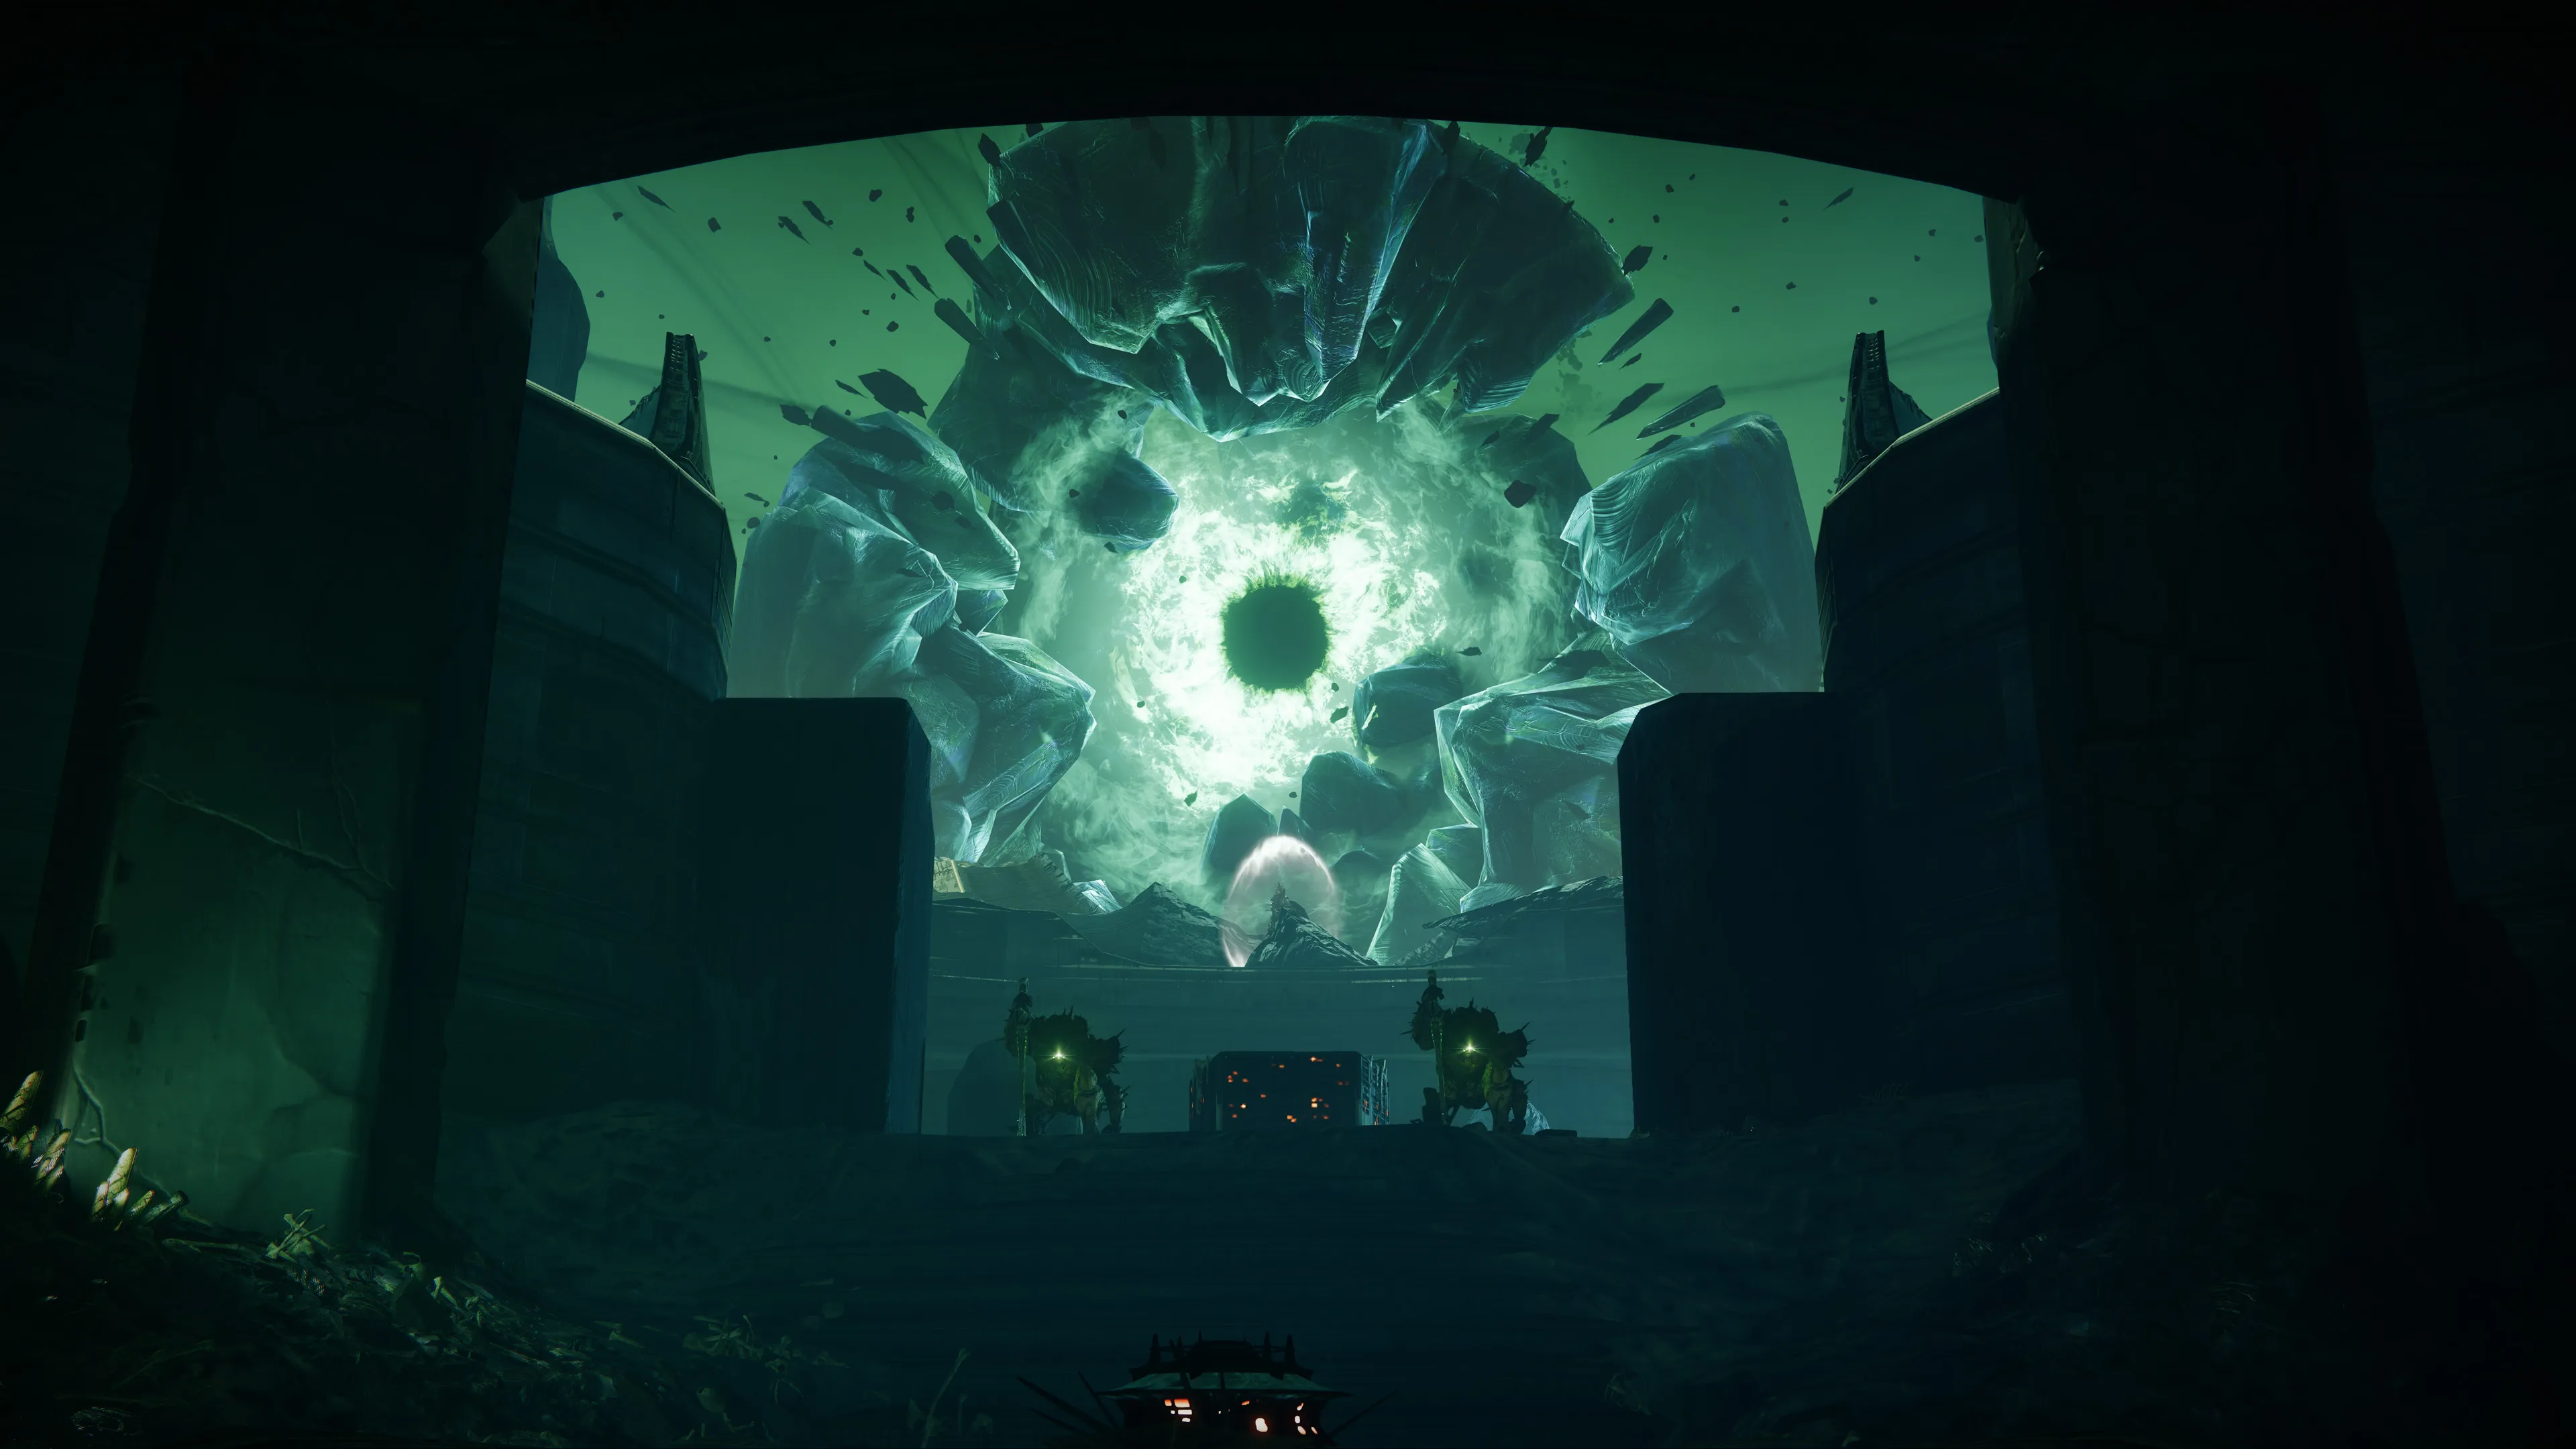 The Oversoul Throne room as seen from the entrance of the Ir Yût encounter. The podium for the Chalice of Light is on the foreground of the image.